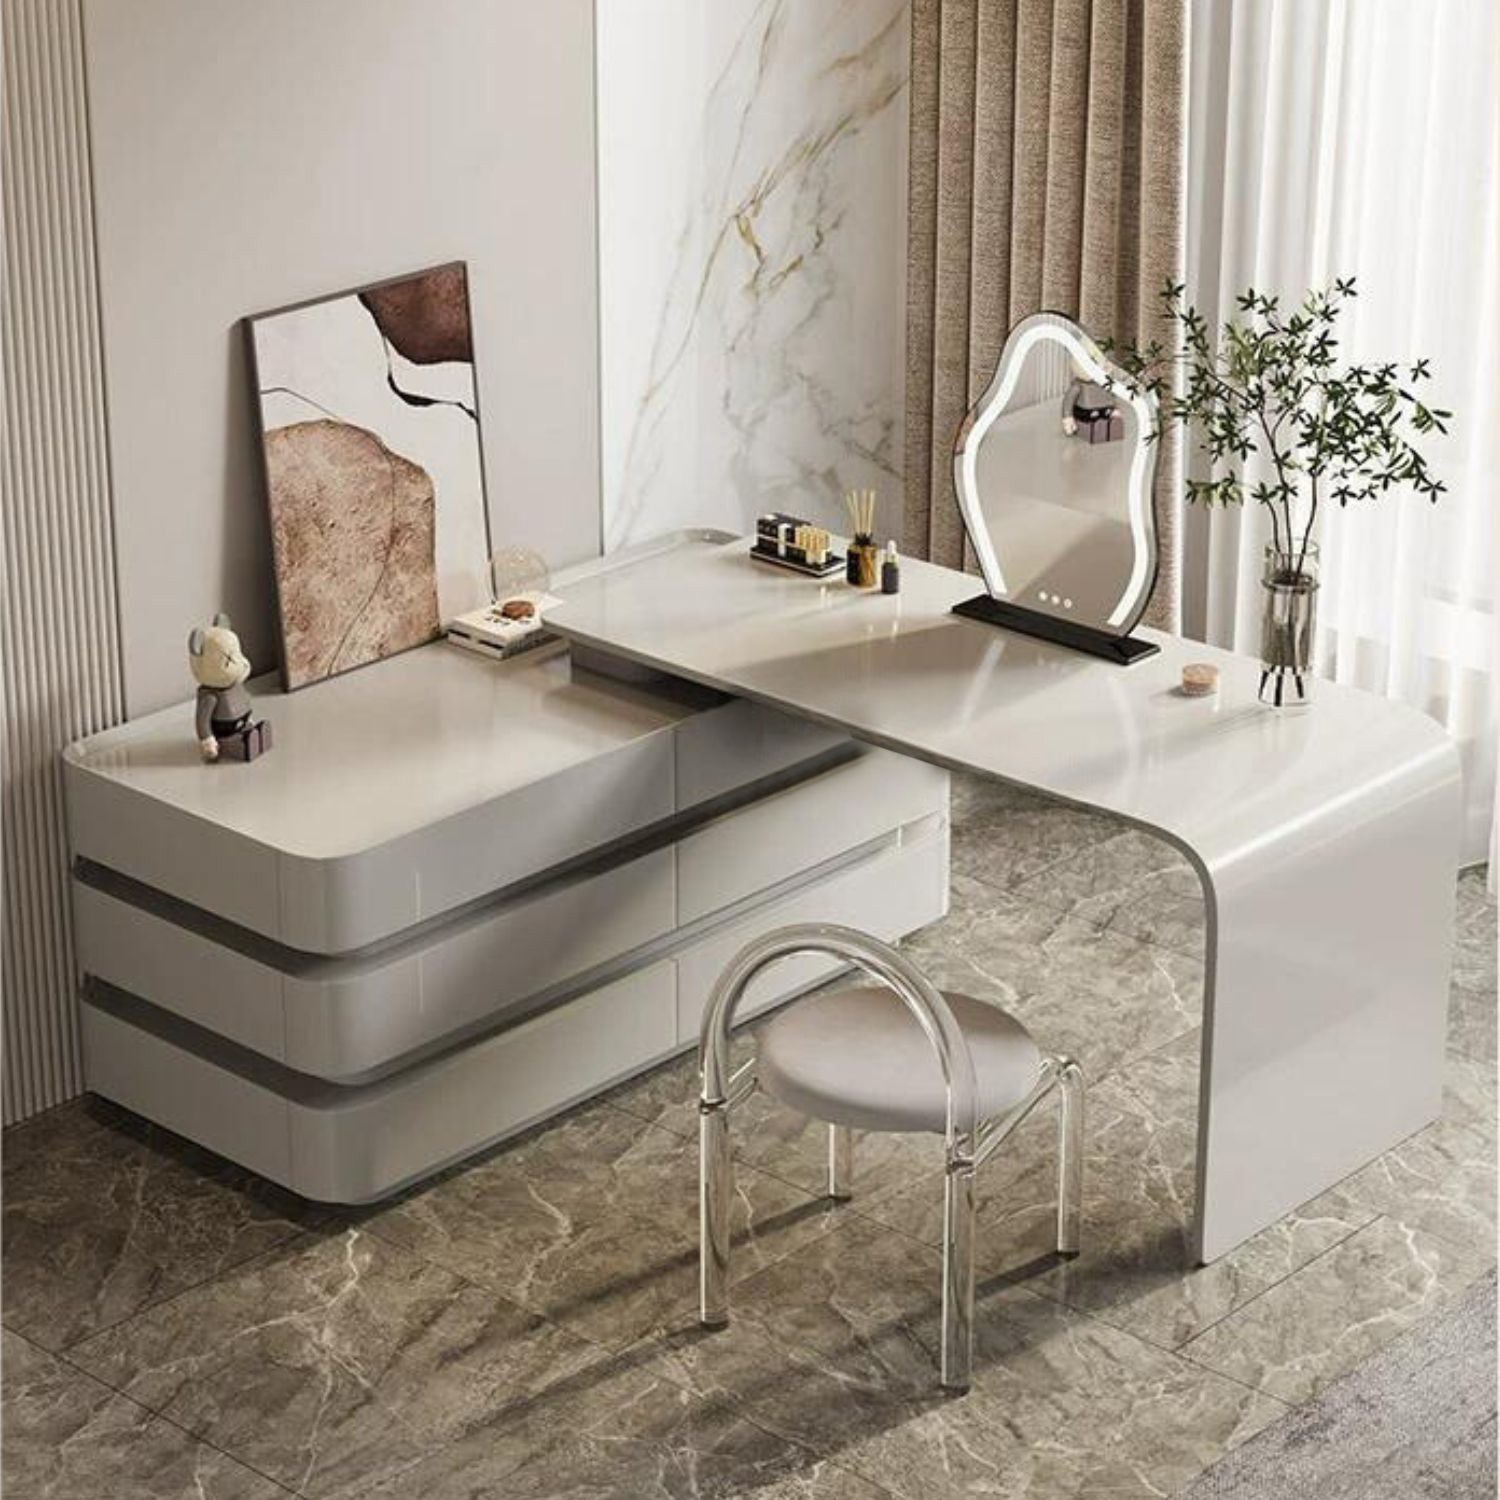 Onsen Vanity with Drawers